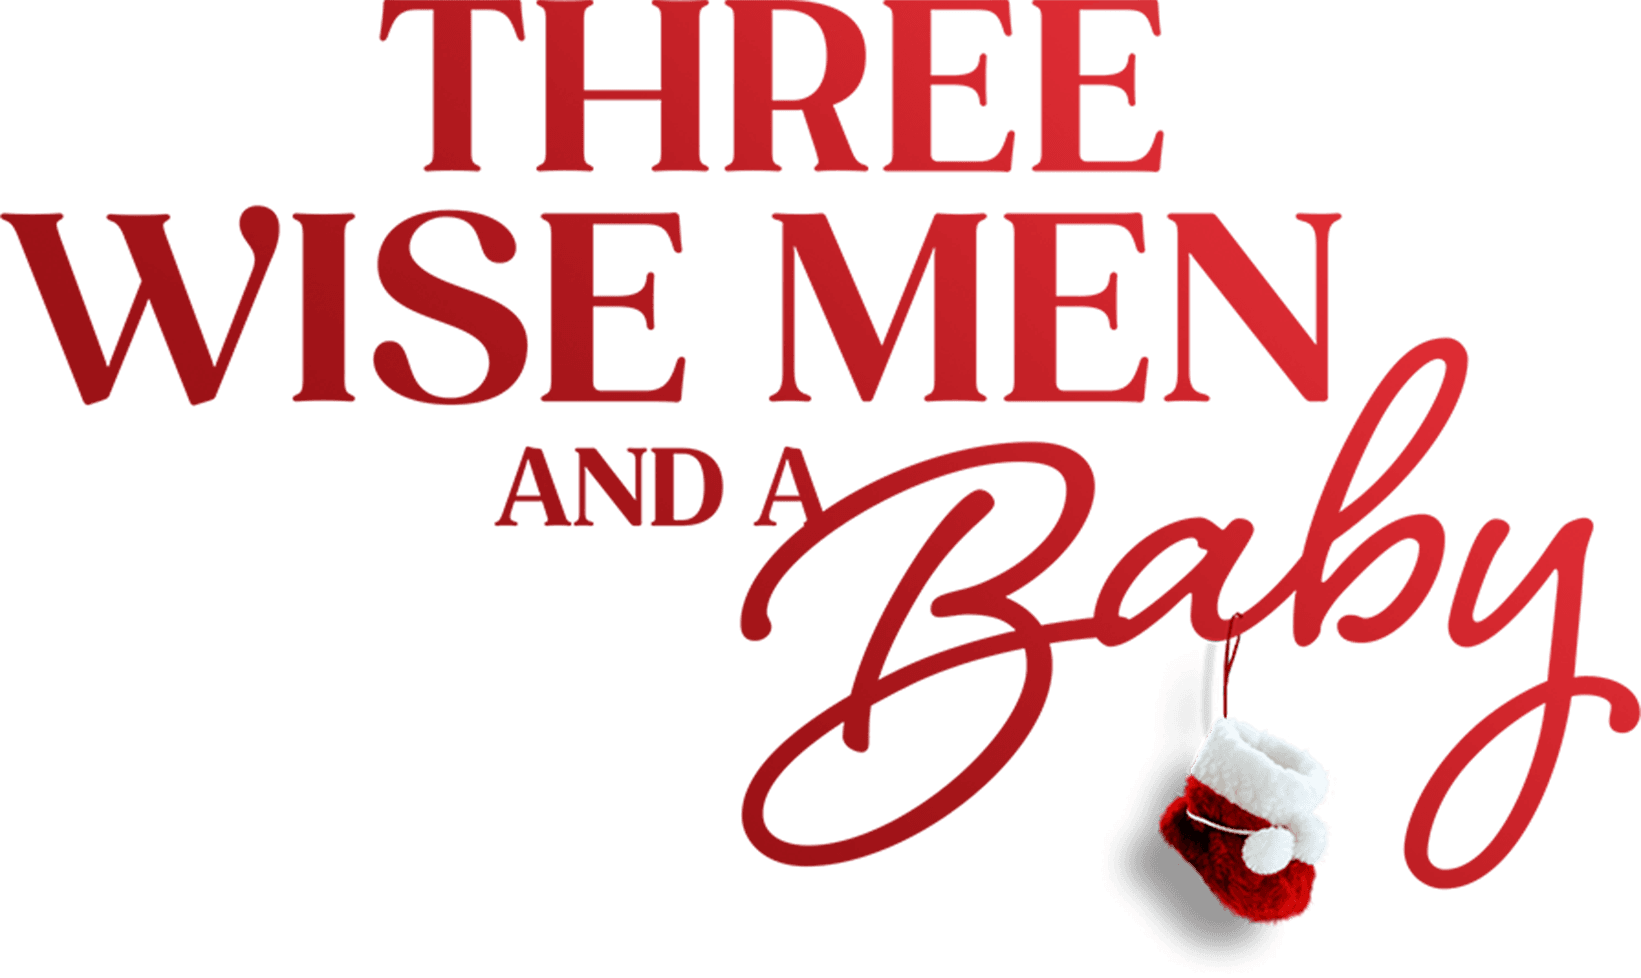 Three Wise Men and a Baby logo